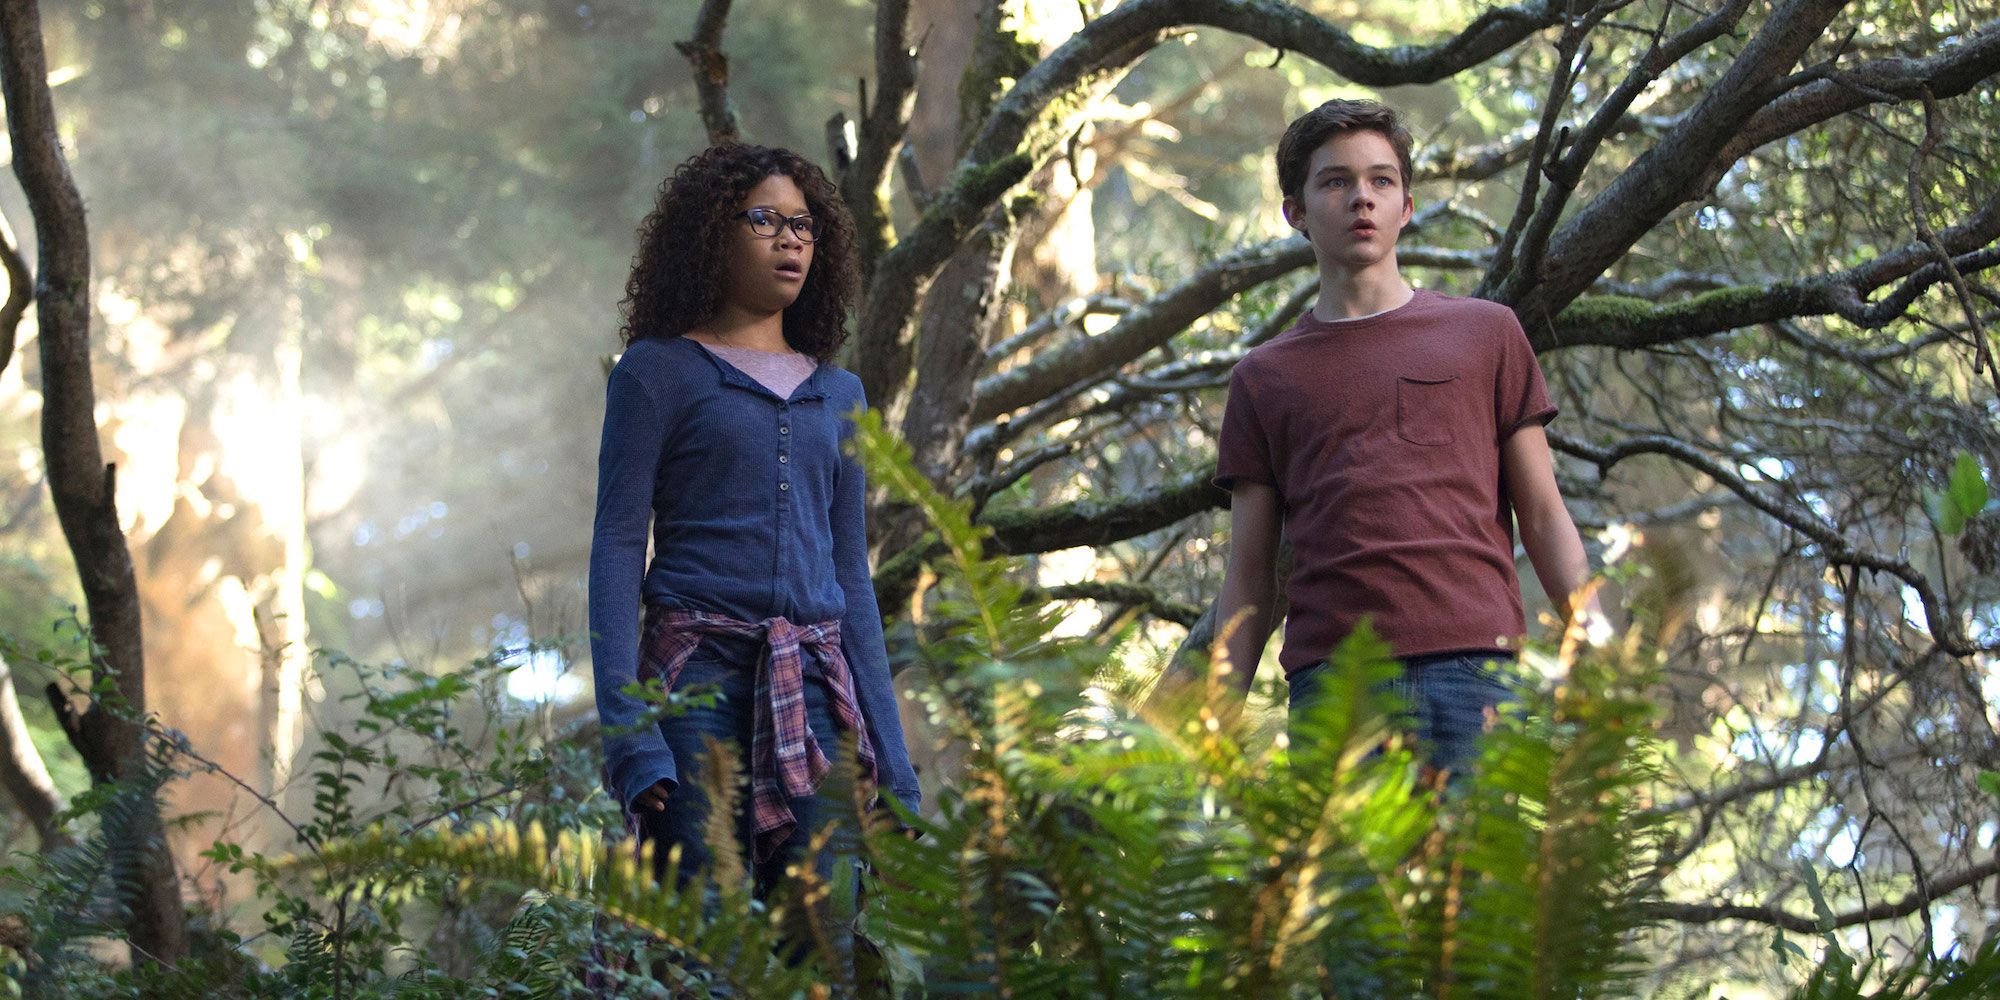 Storm Reid and Levi Miller in the forest in A Wrinkle in Time